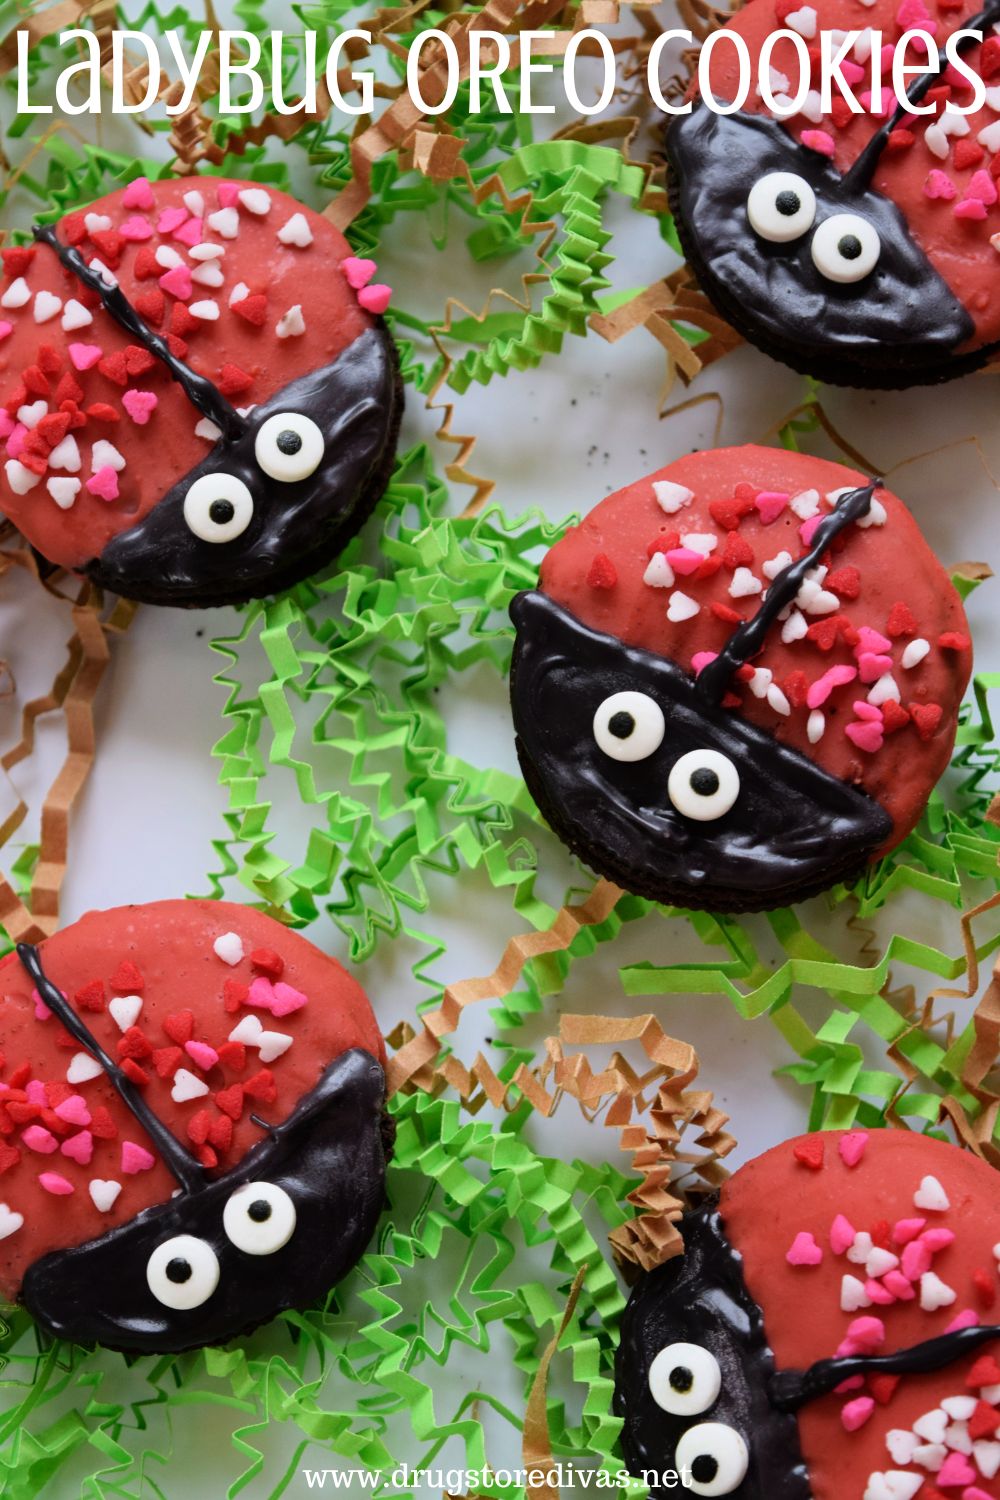 Five OREO cookies decorated to look like ladybugs on green and brown paper shred with the words 